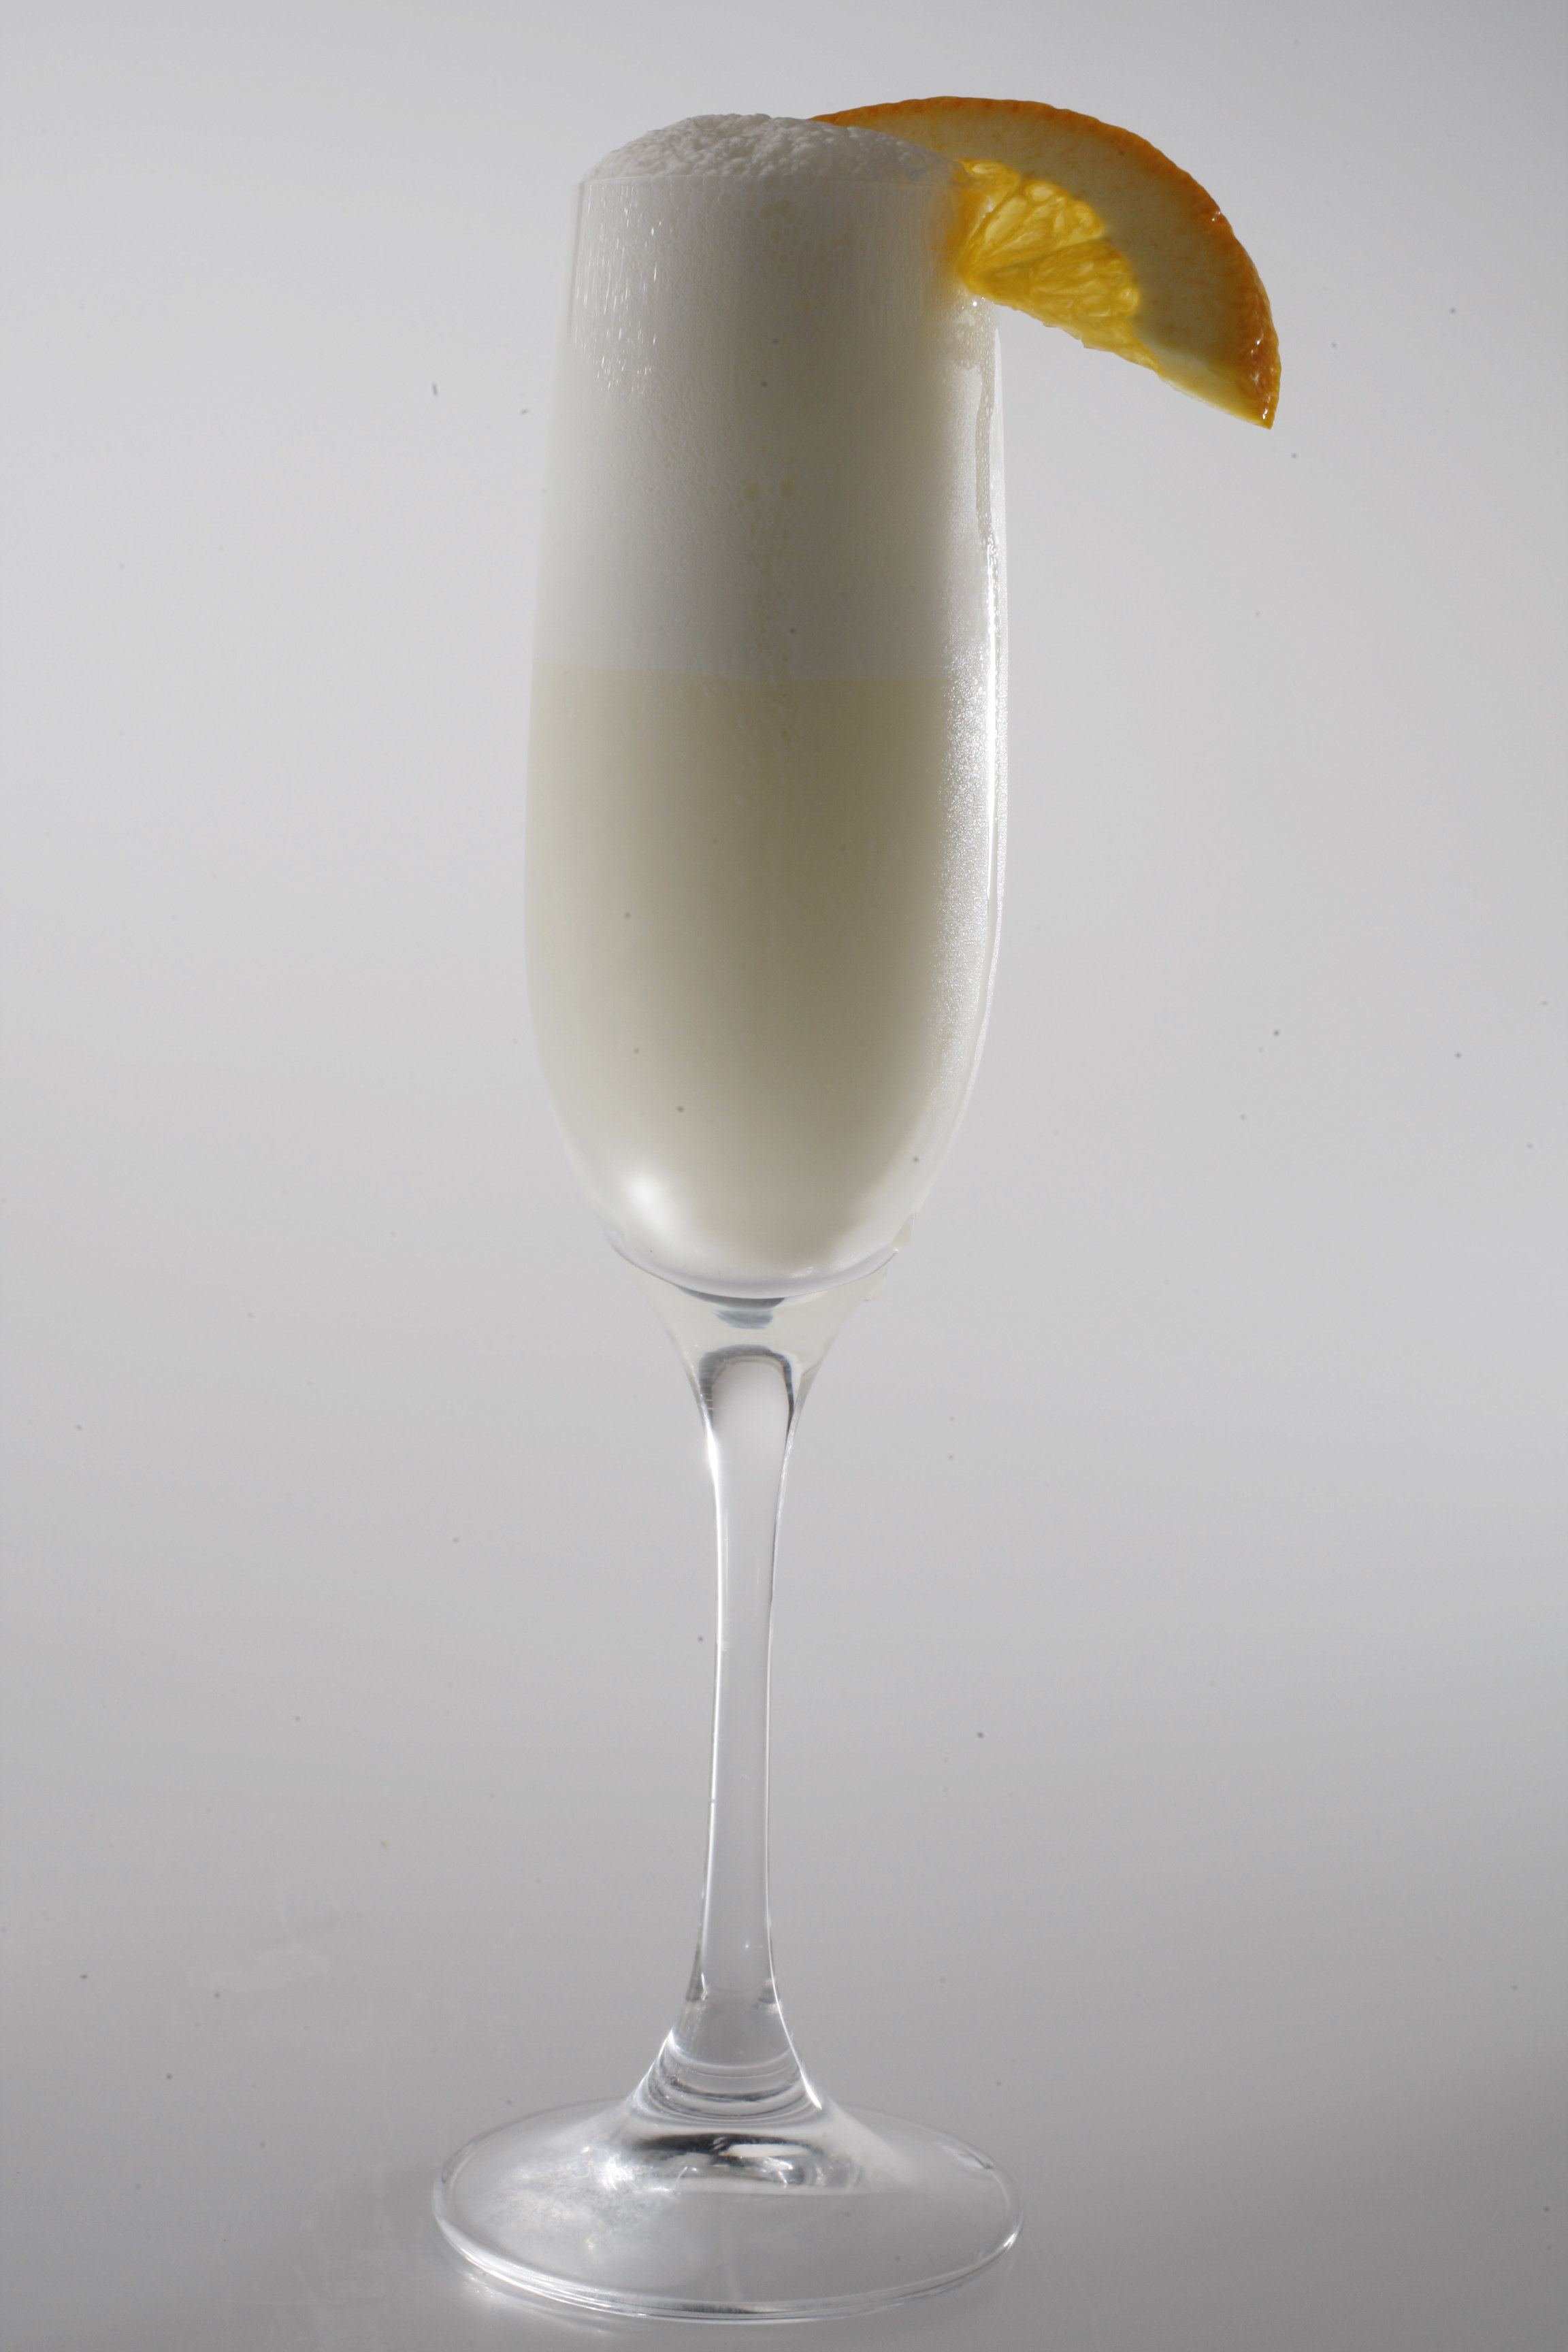 Ramos Fizz cocktail in a champagne glass garnished with orange slice